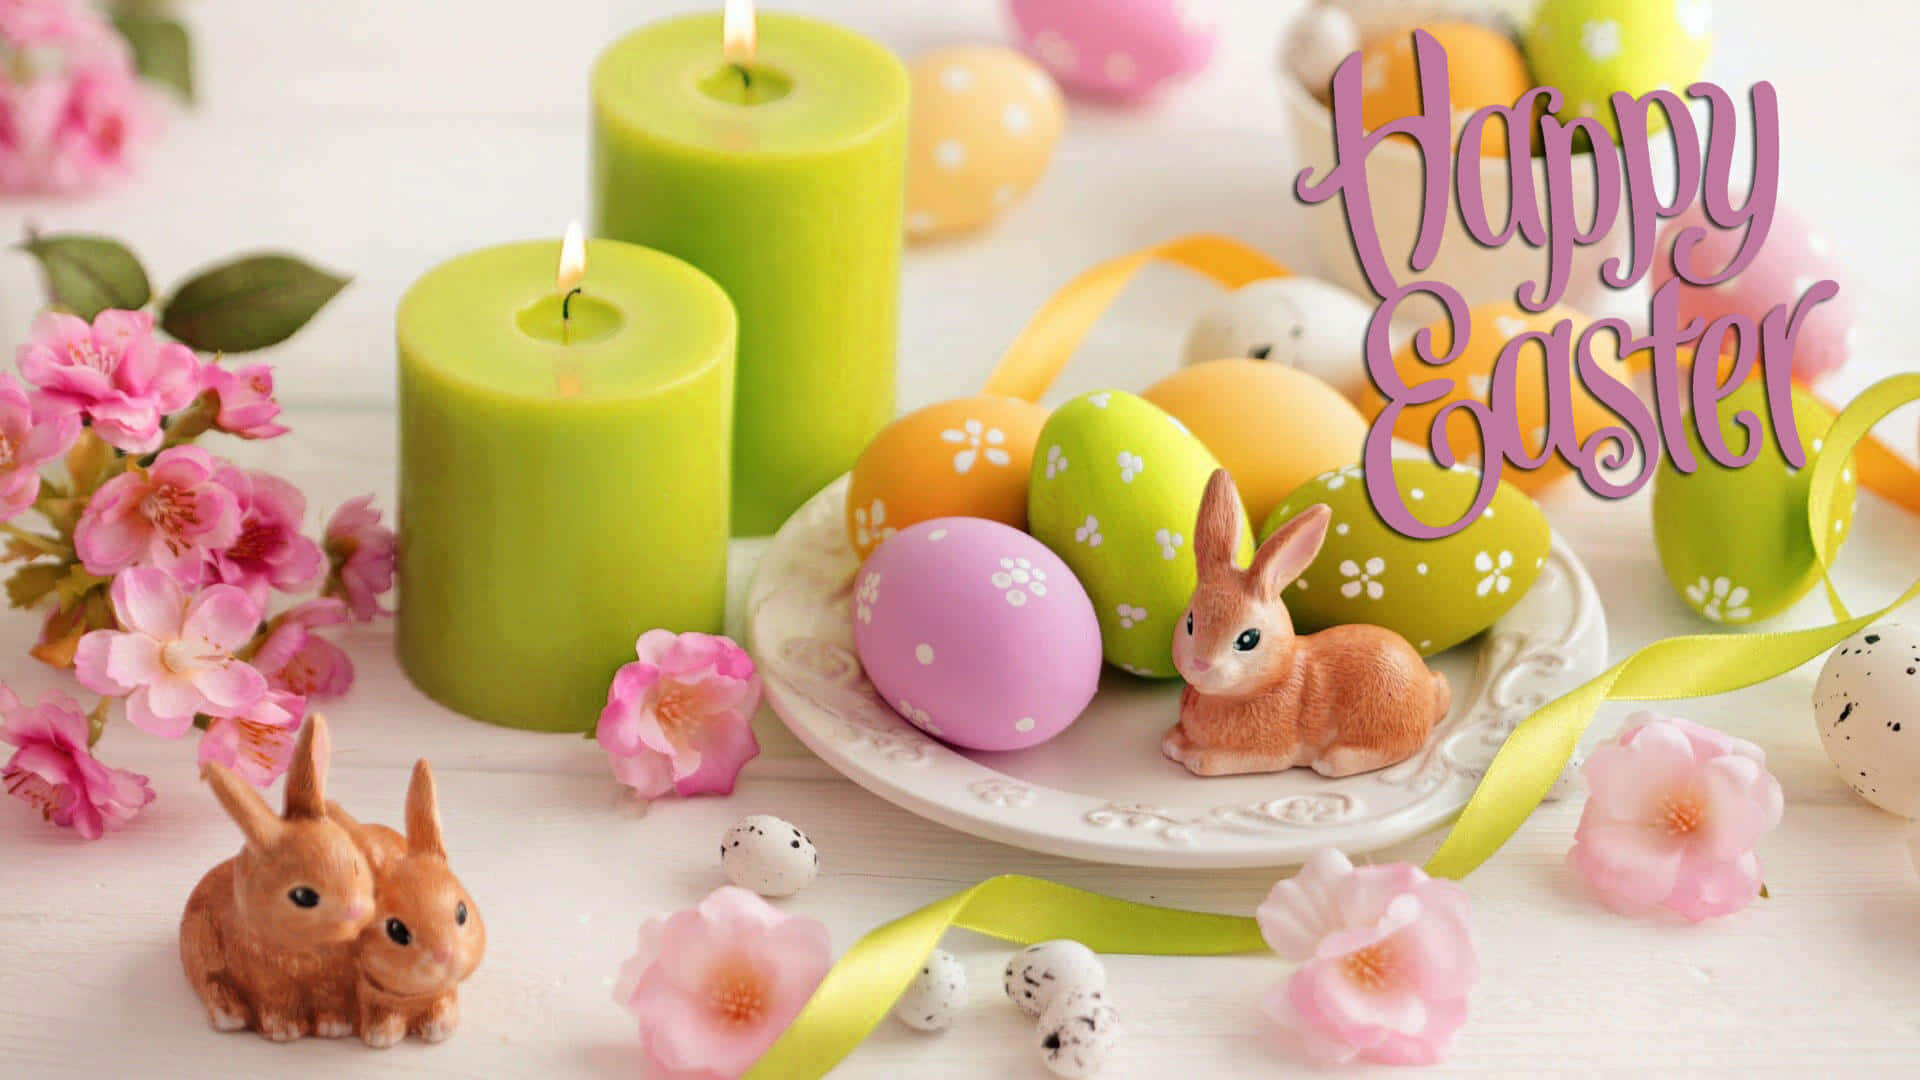 Wishing you a Happy and Cute Easter! Wallpaper